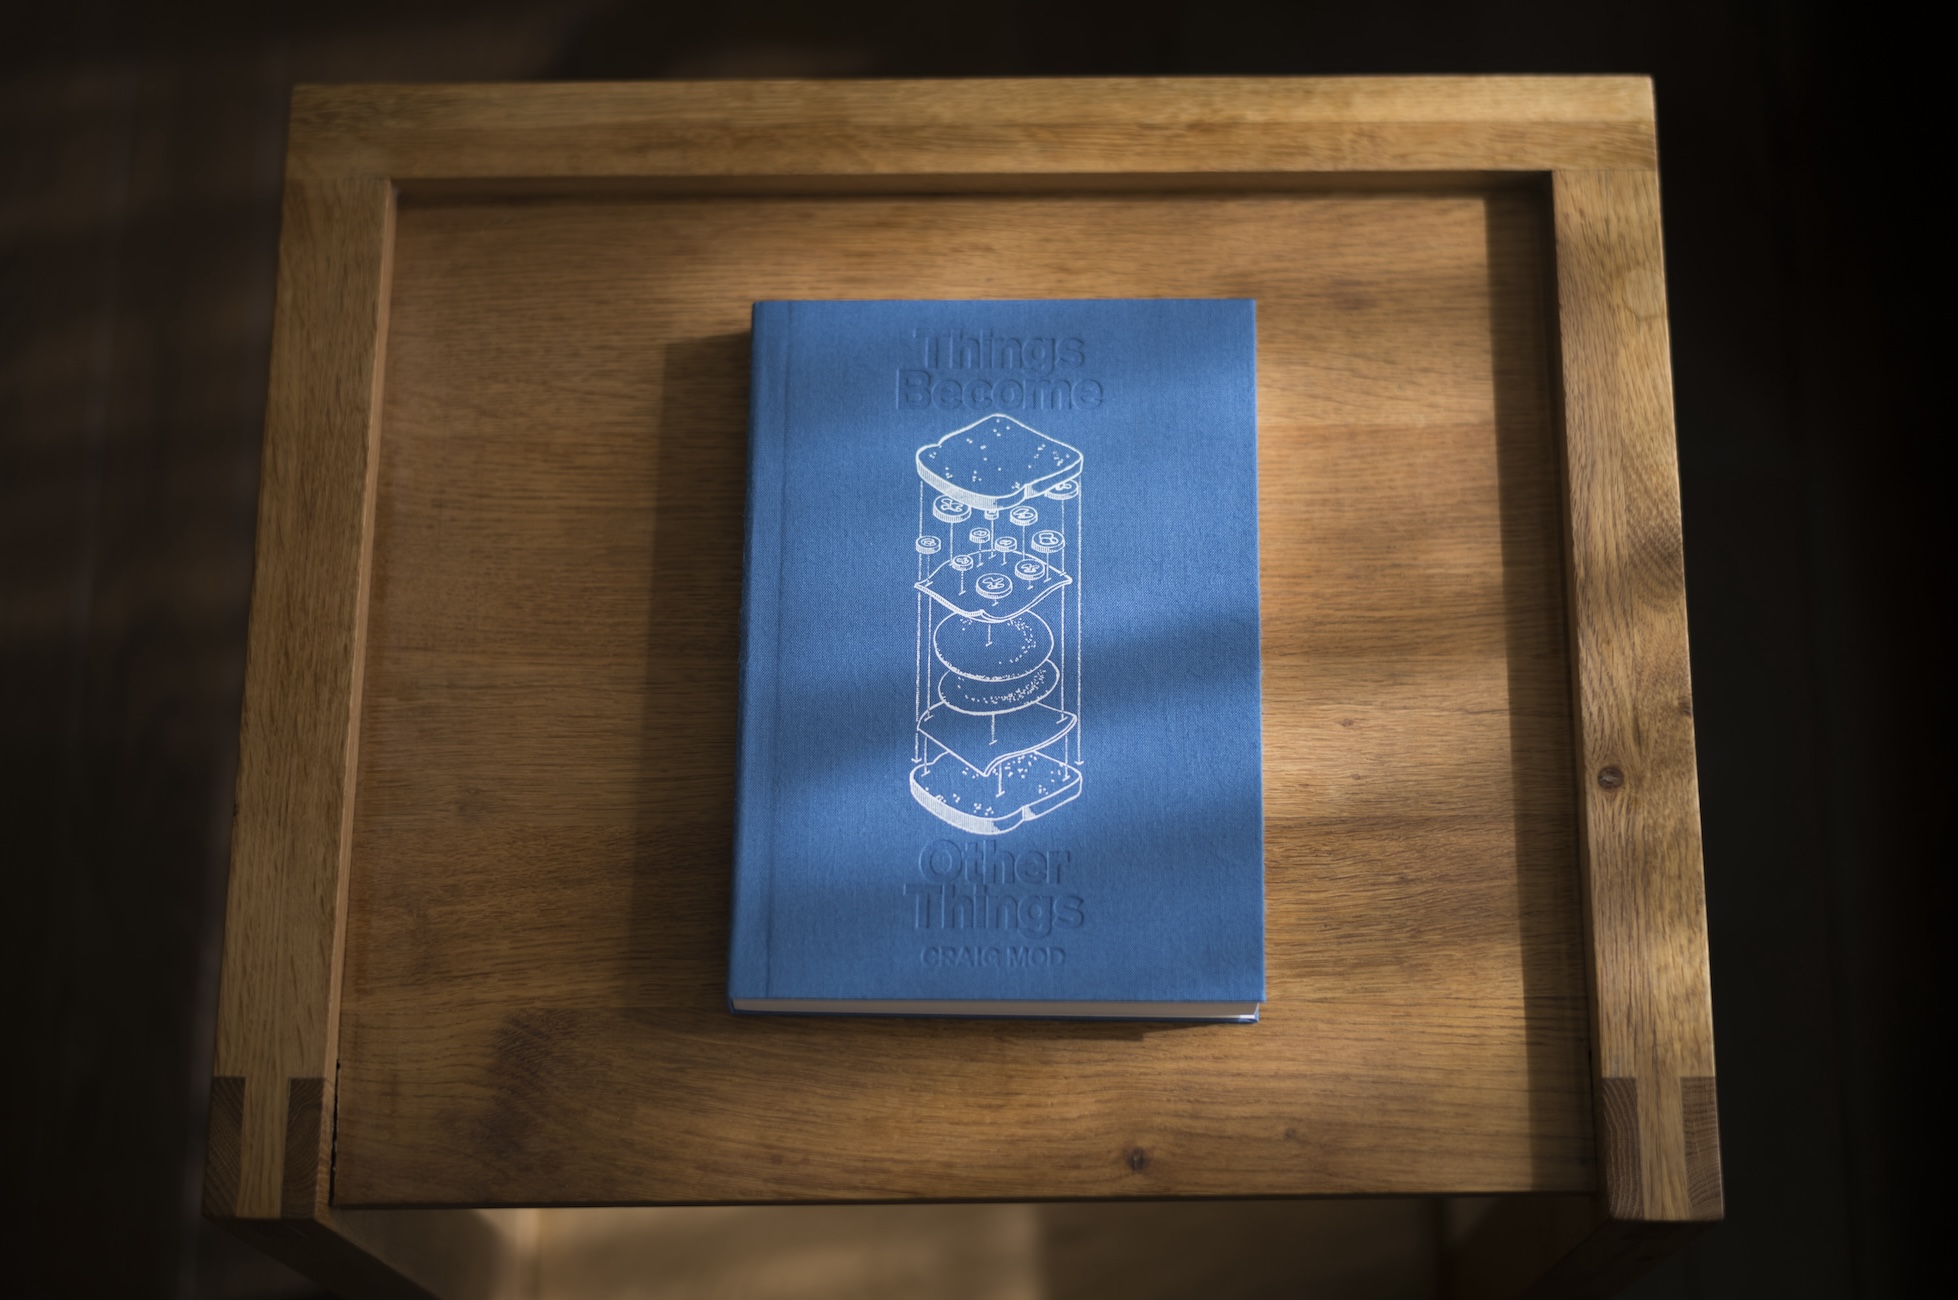 A blue book on a wooden tray